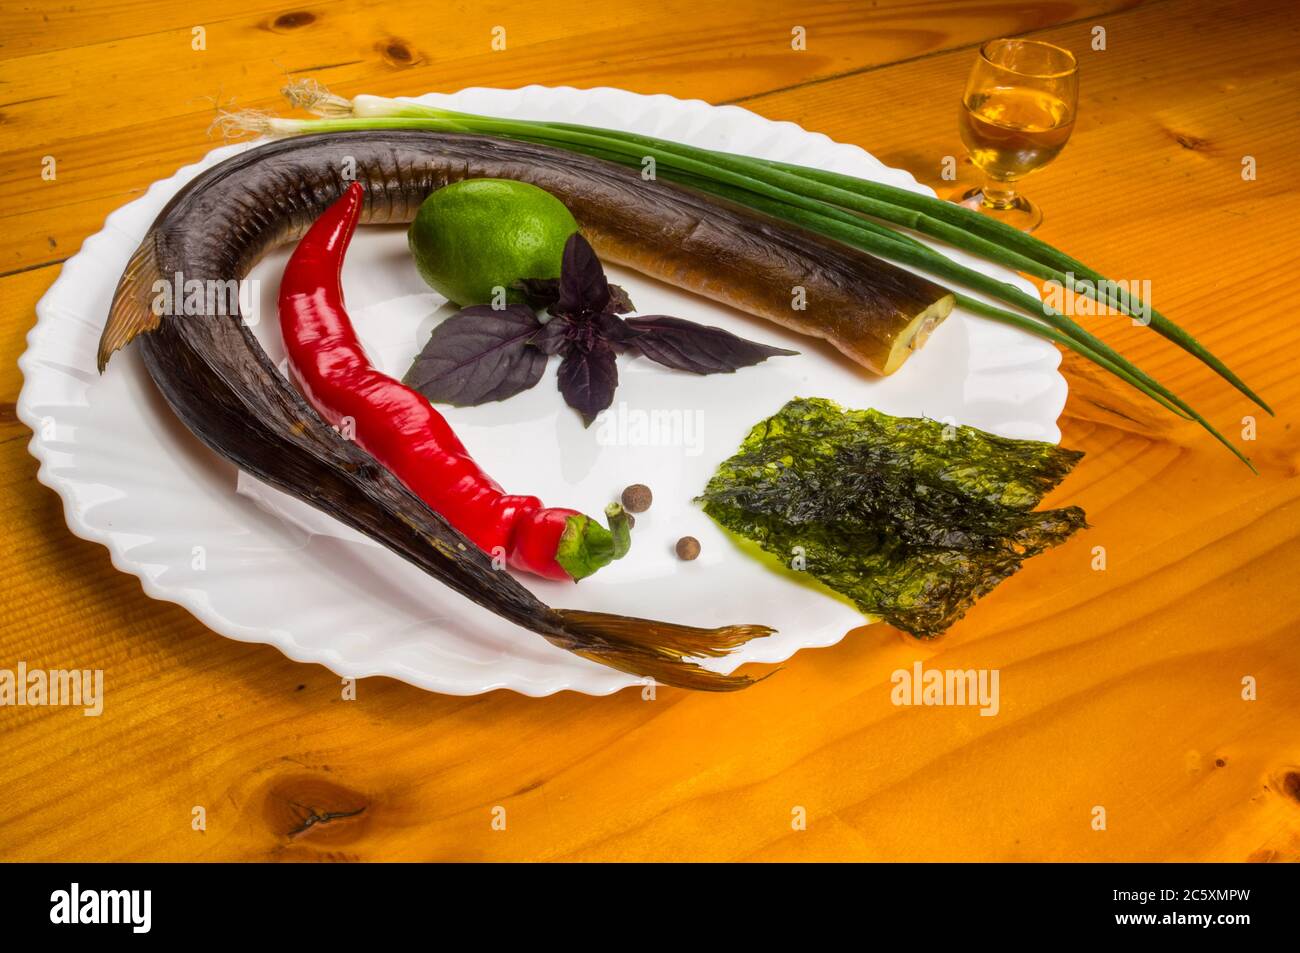 smoked garfish with lime, Basil, green onions, chili, nori chips, spices, olive oil in a white ceramic dish, on a wooden table Stock Photo